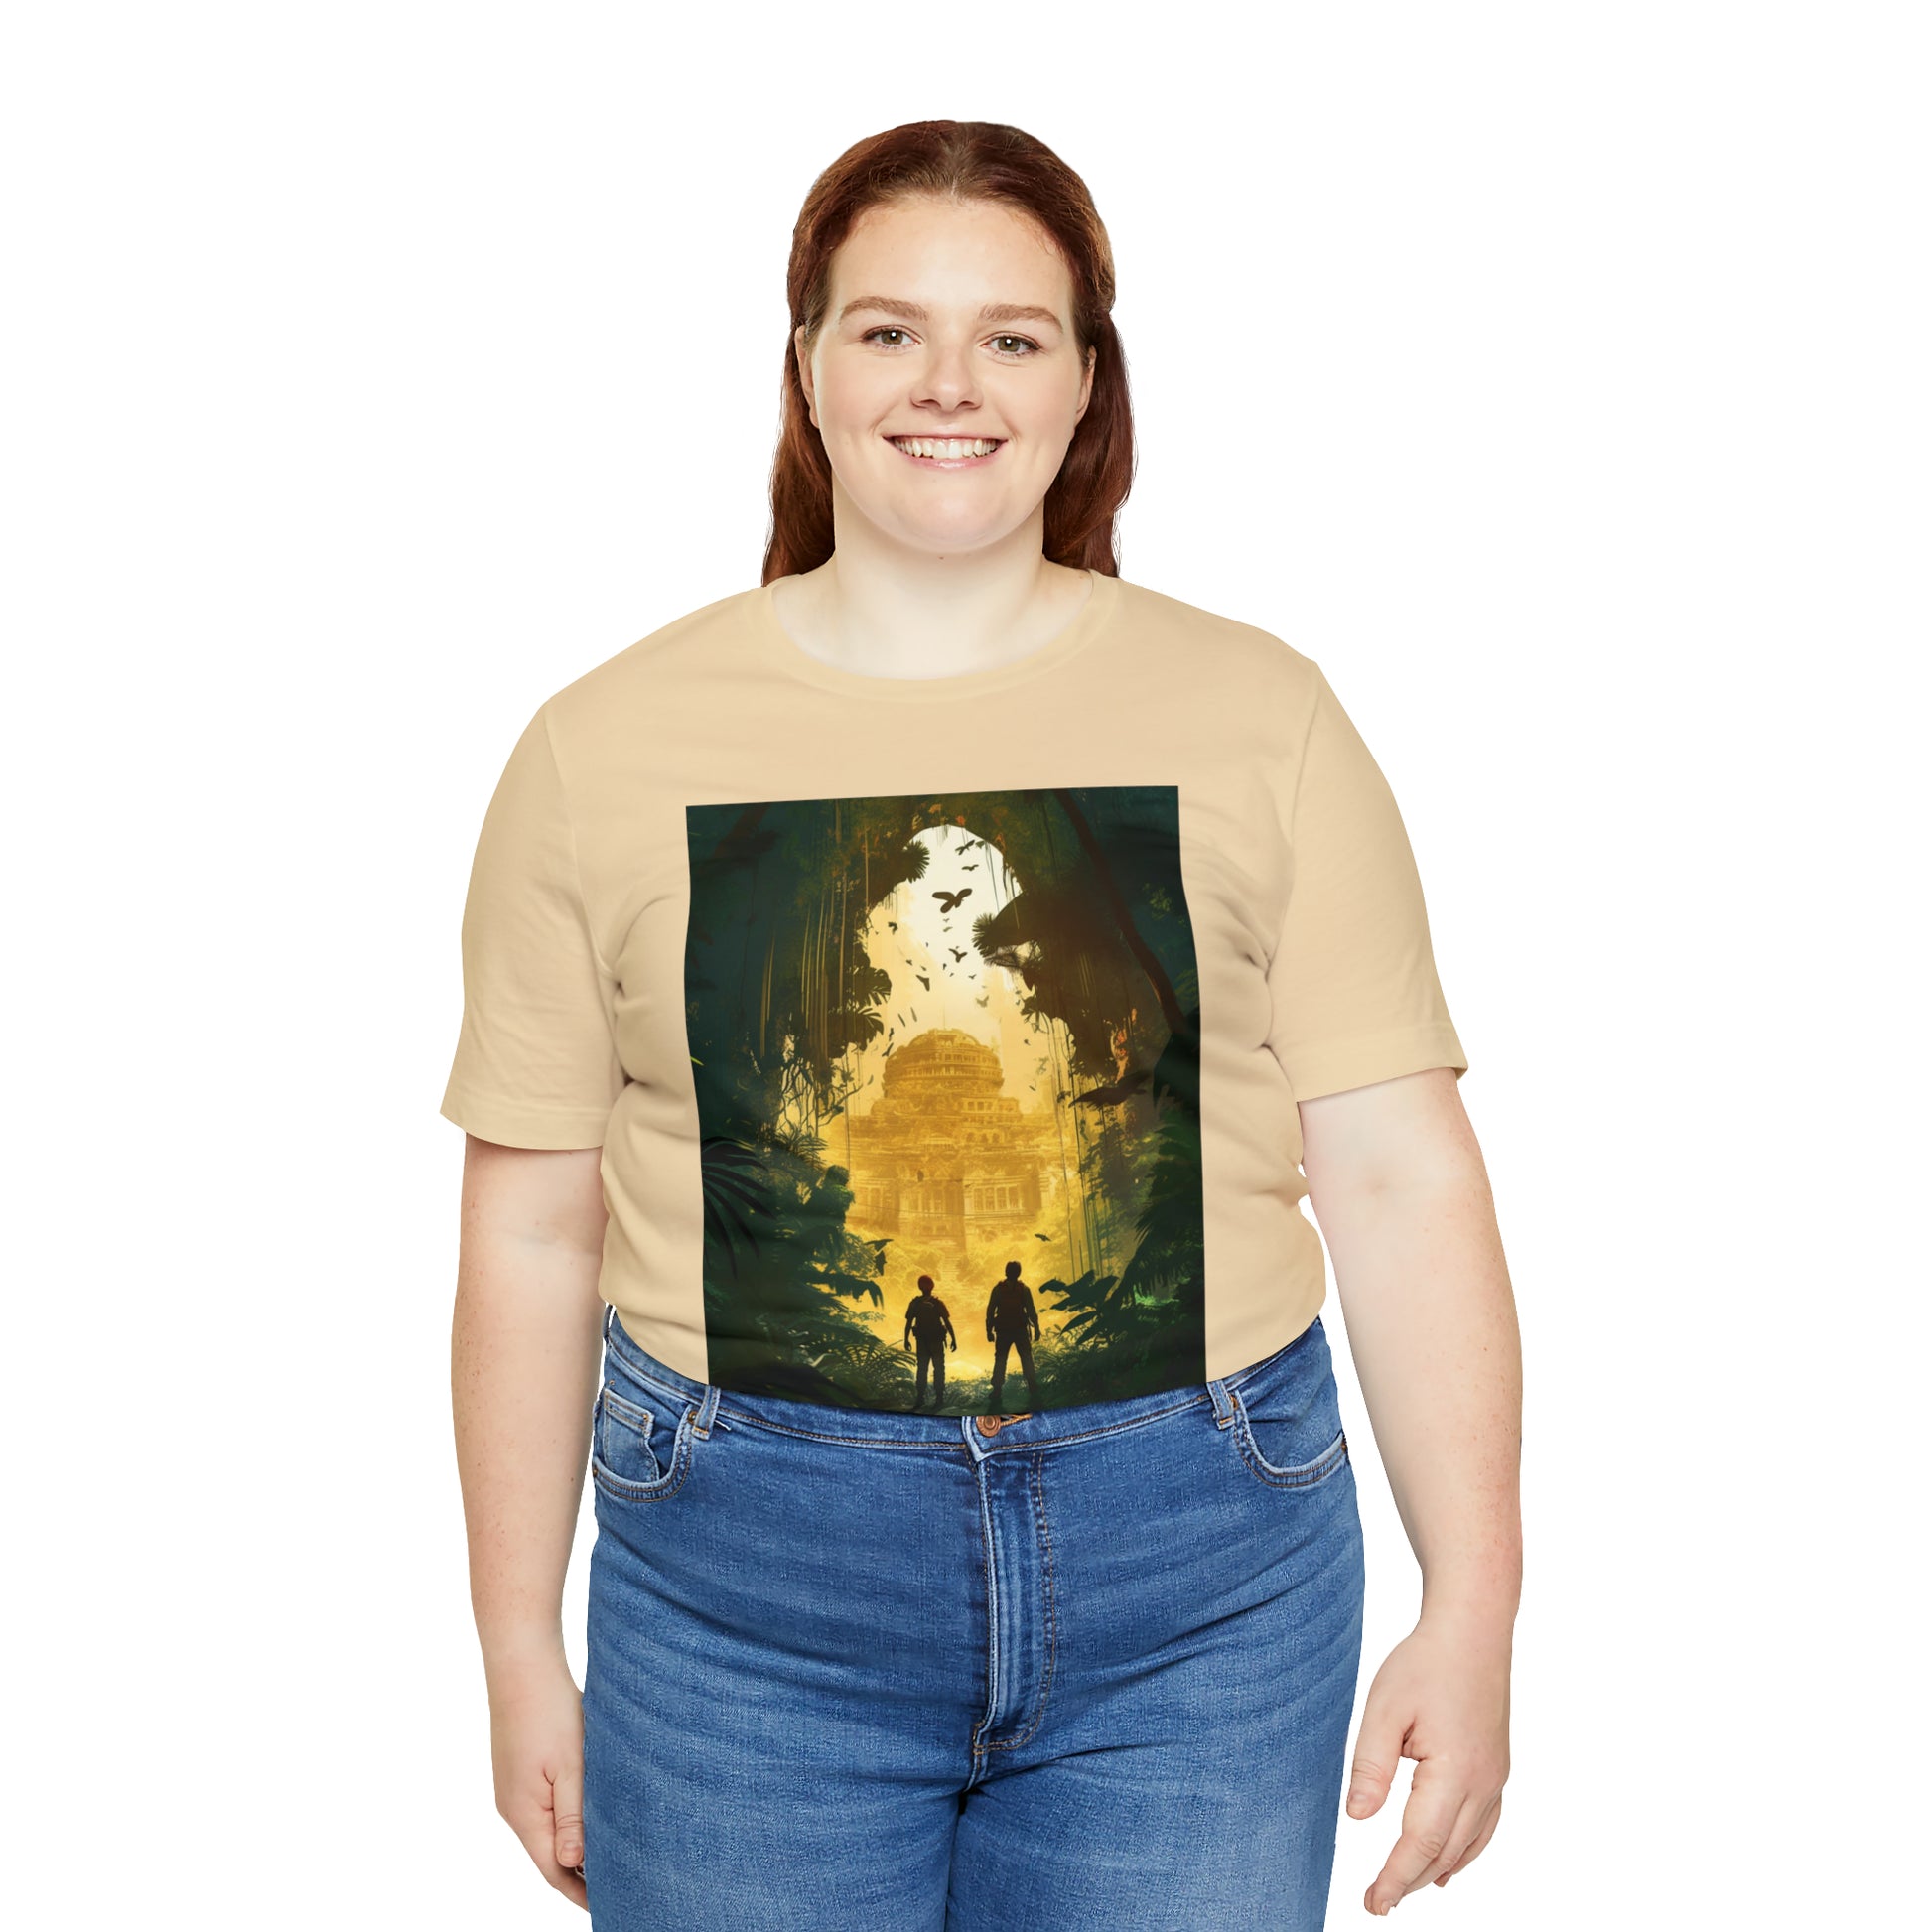 soft-cream-quest-thread-tee-shirt-with-ruins-of-arnak-scene-on-front